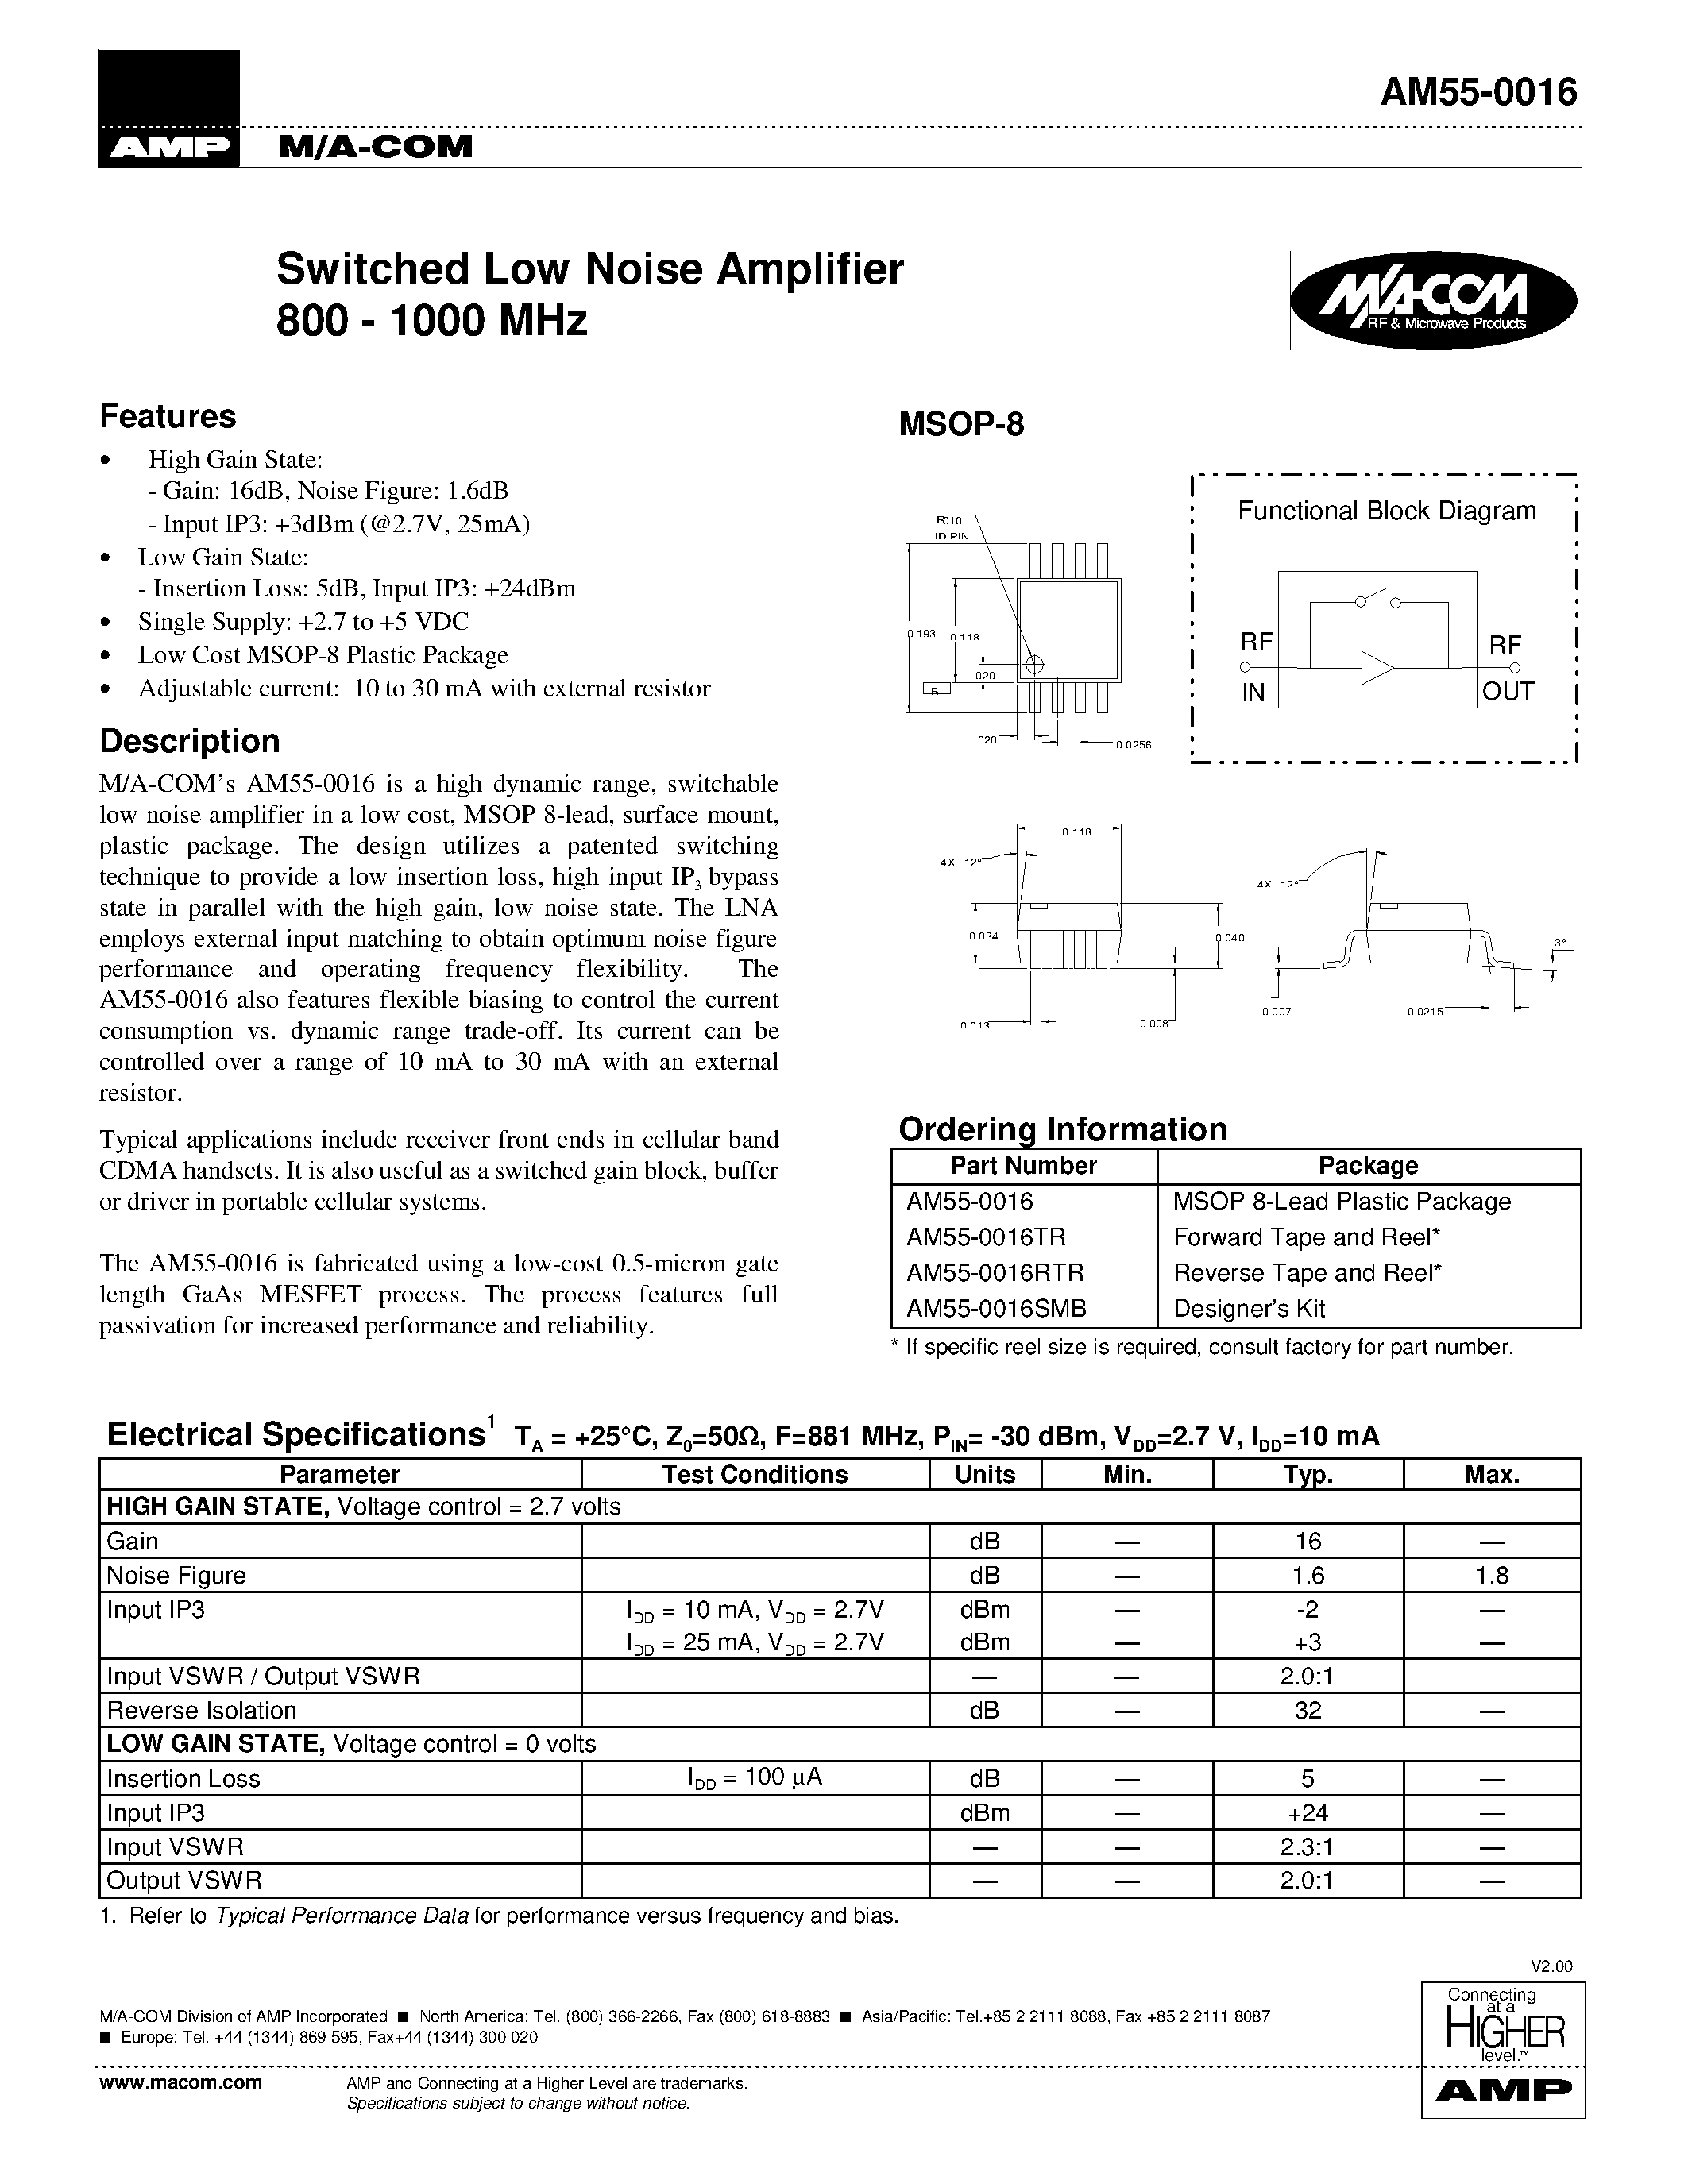 Datasheet AM55-0016TR - Switched Low Noise Amplifier 800 - 1000 MHz page 1